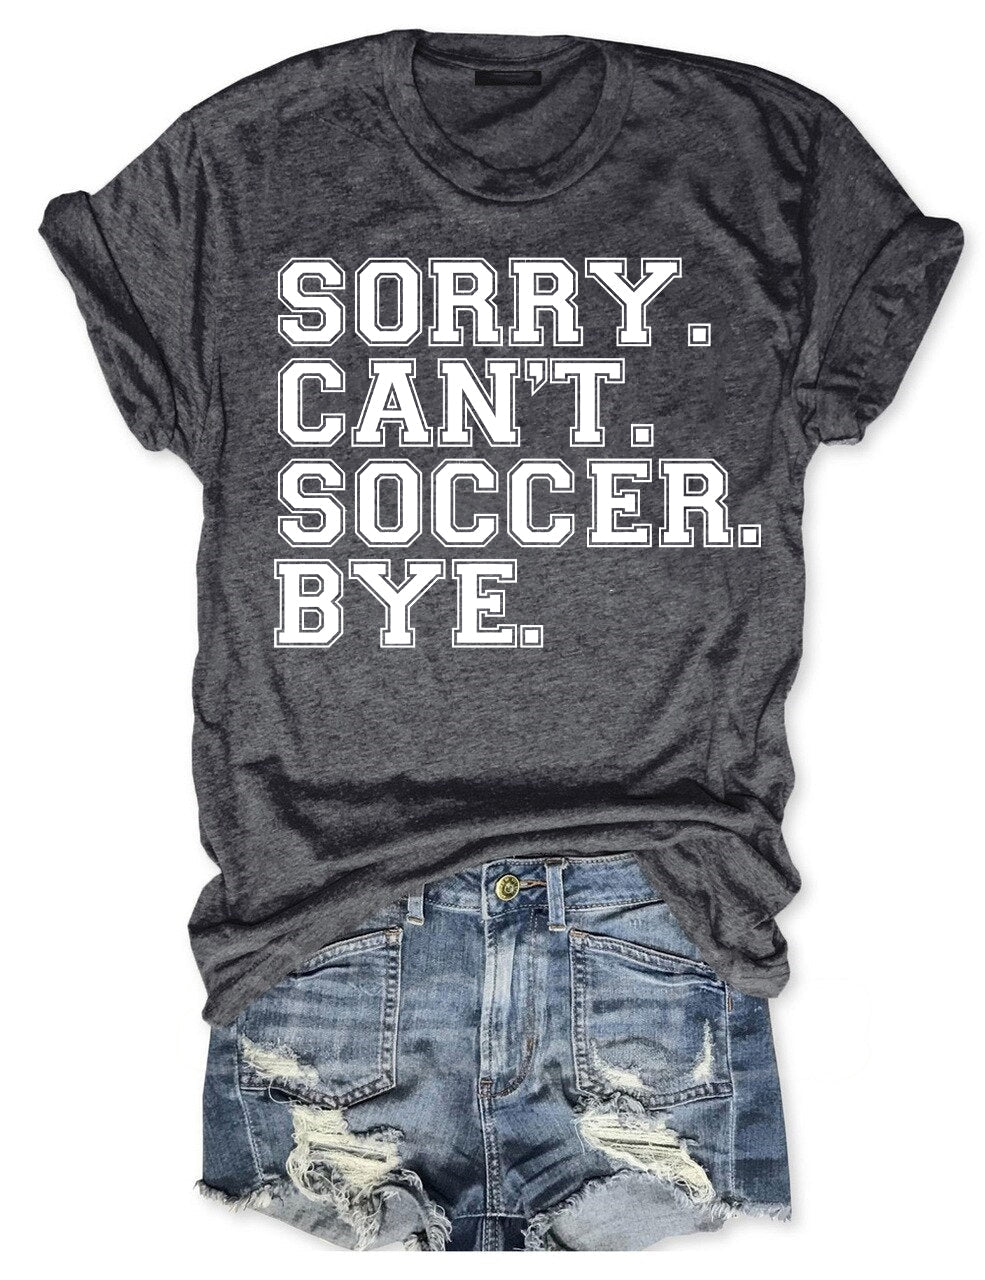 Sorry Can't Soccer Bye Funny T-shirt